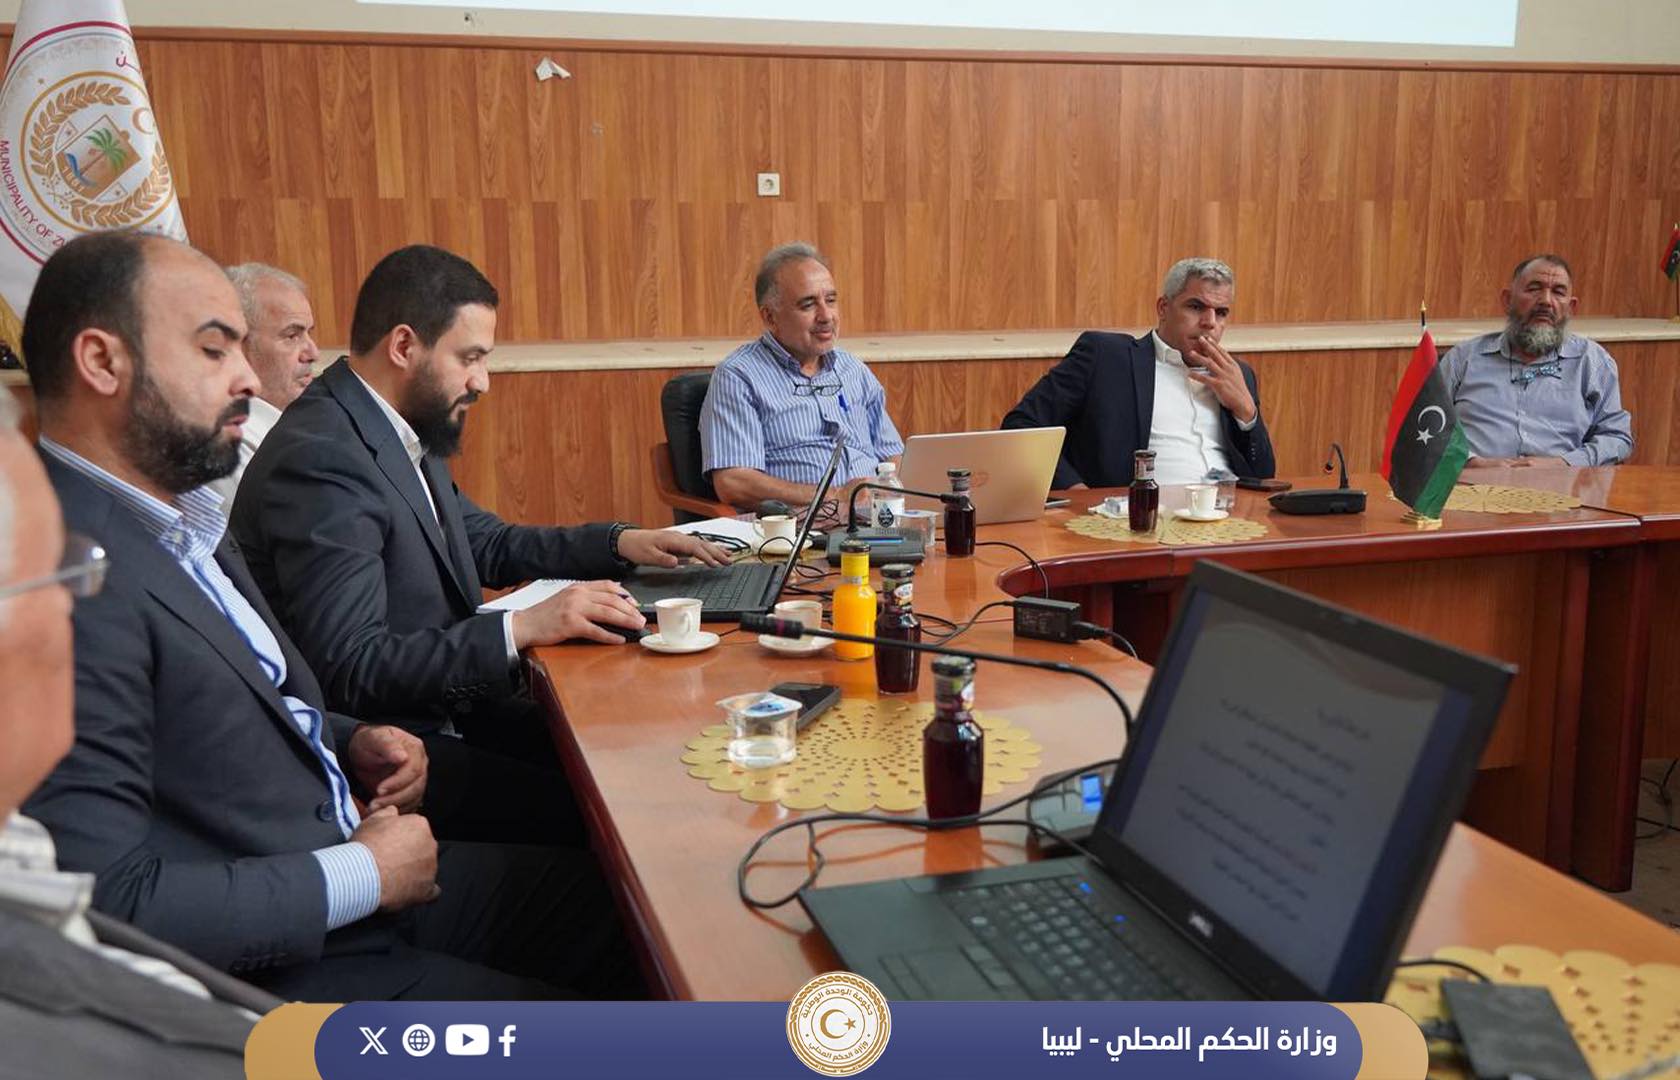 Committee charged with following up on the phenomenon of groundwater overflow in the municipality of Zliten recommends preparing a plan for the municipality’s water supply.